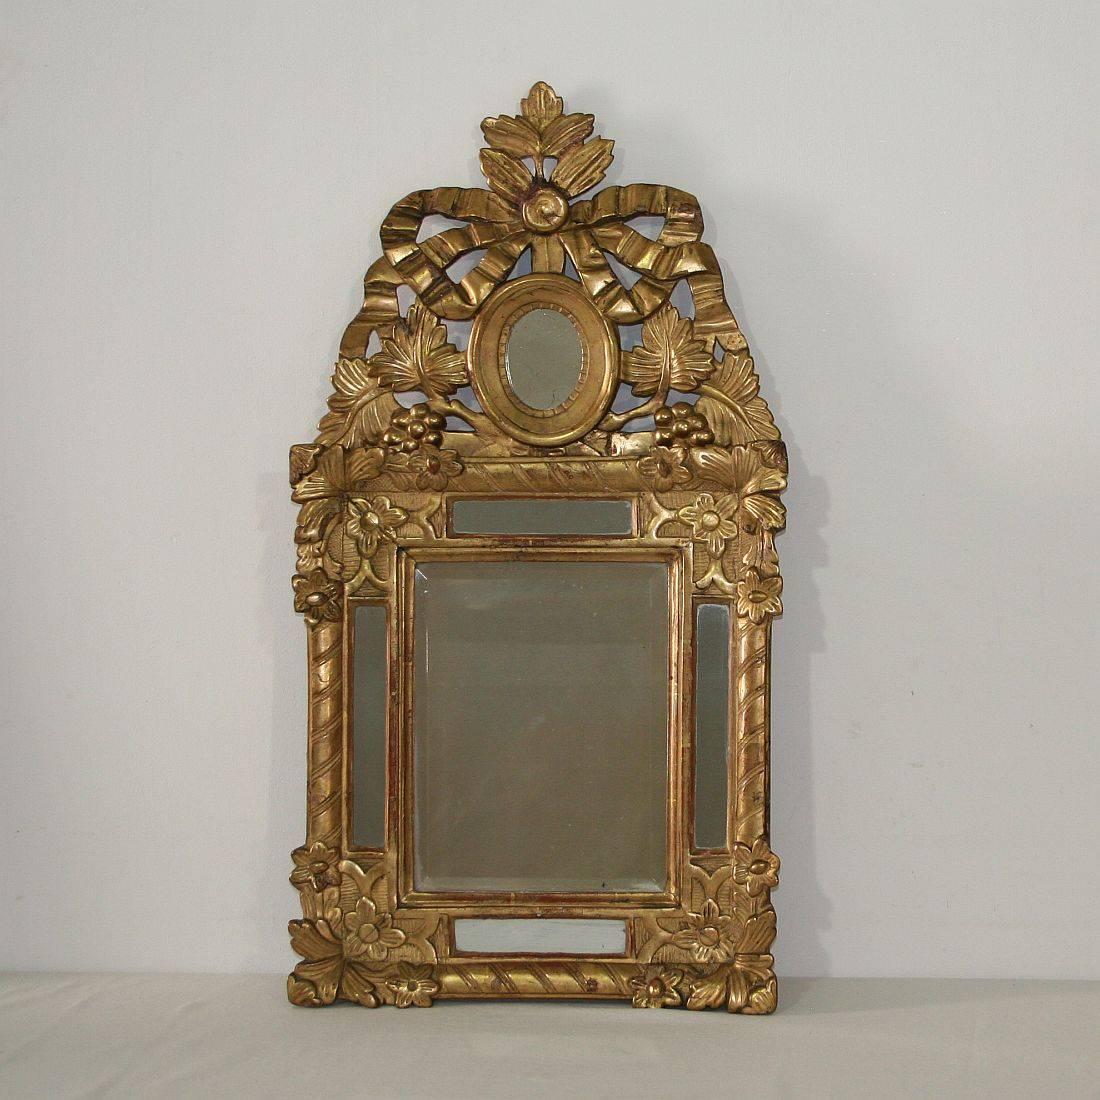 Thank you for looking at one of our selected items on 1st Dibs.
We are able to offer our unique and original antiques at the most competitive price level on this platform due to the fact that we are travelling through France every month and hand